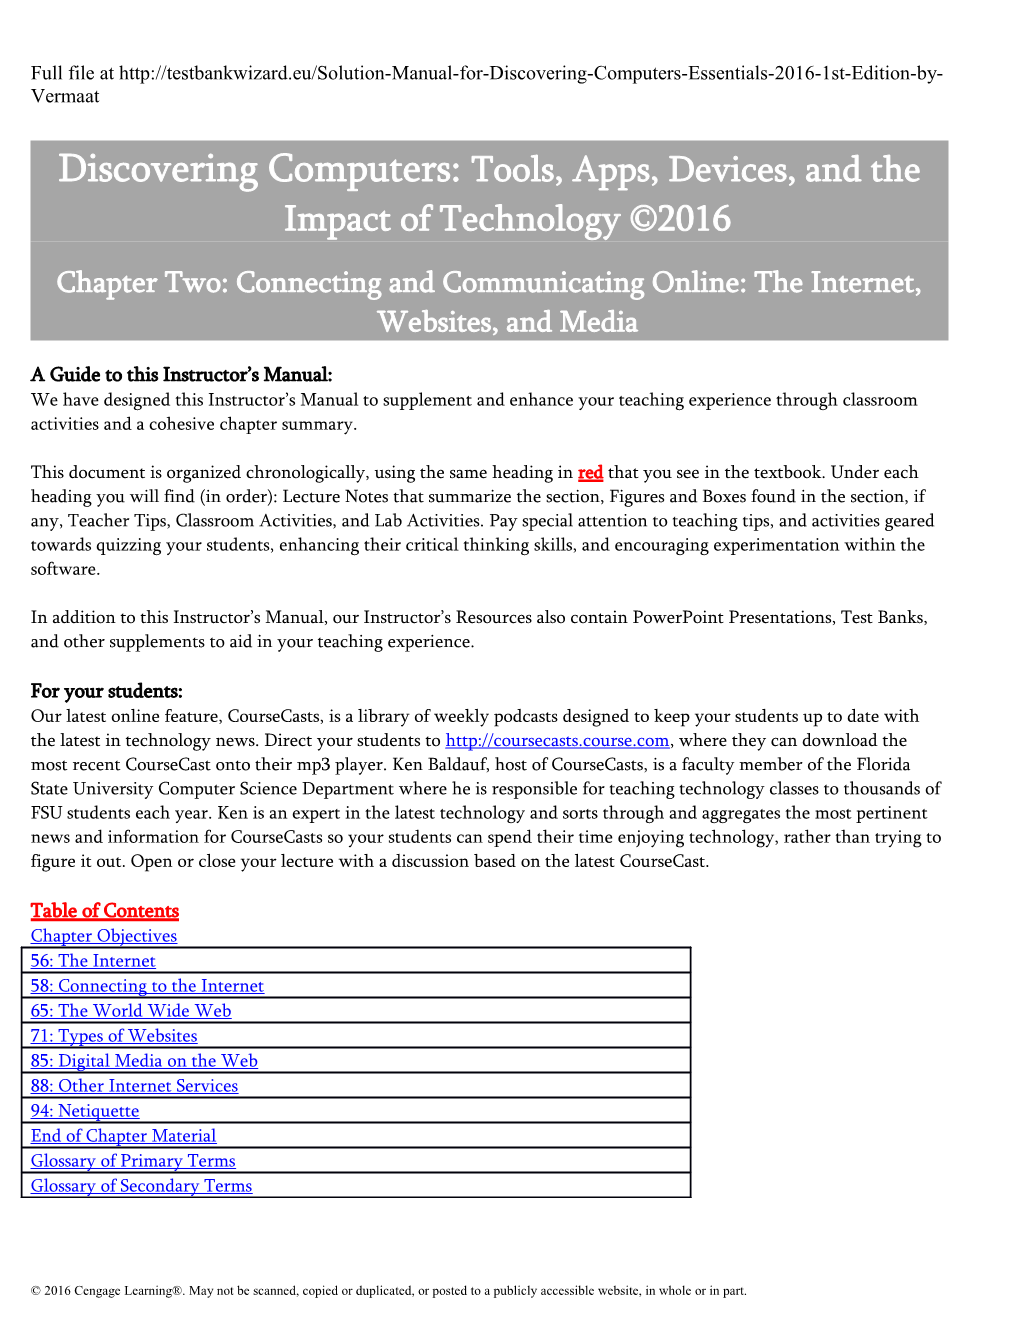 Discovering Computers:Tools, Apps, Devices, and the Impact of Technology 2016